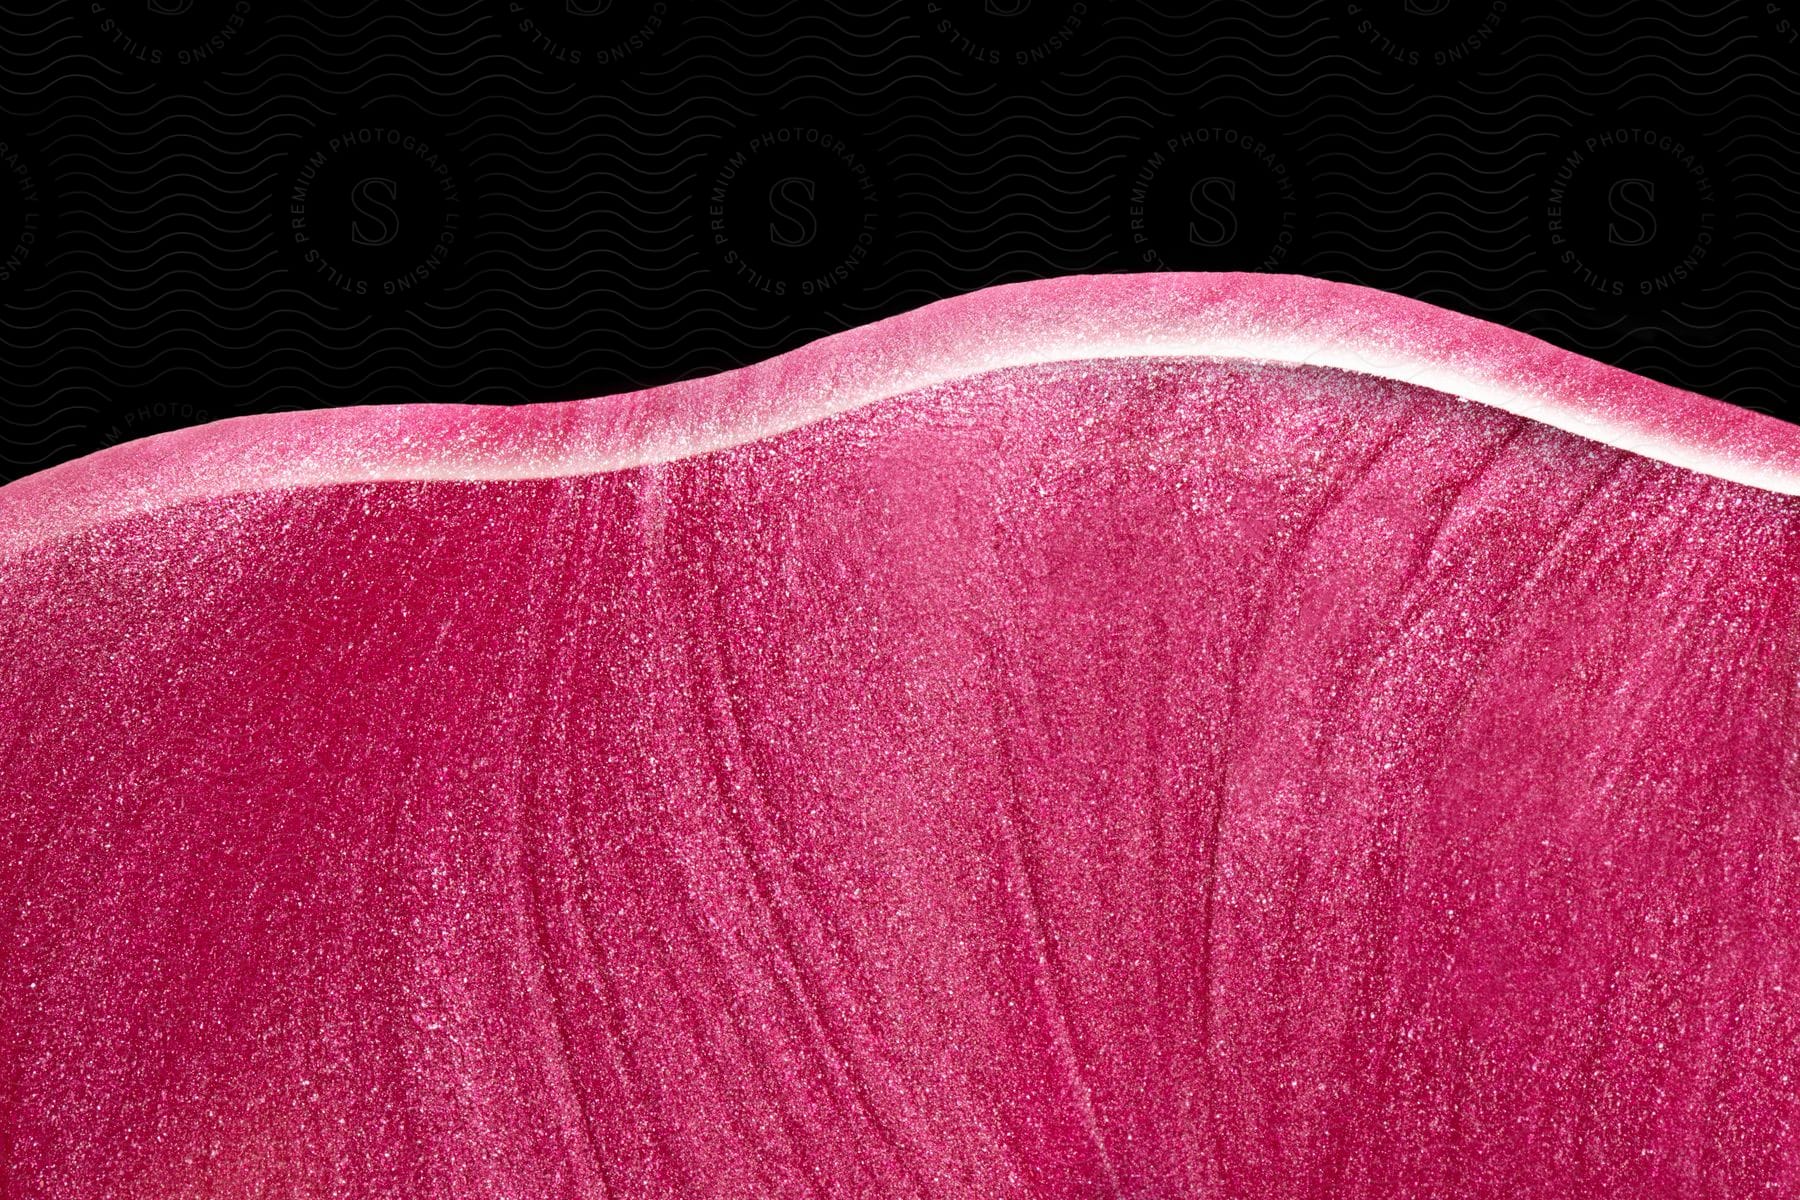 A digital image of a bright pink petal against a black background